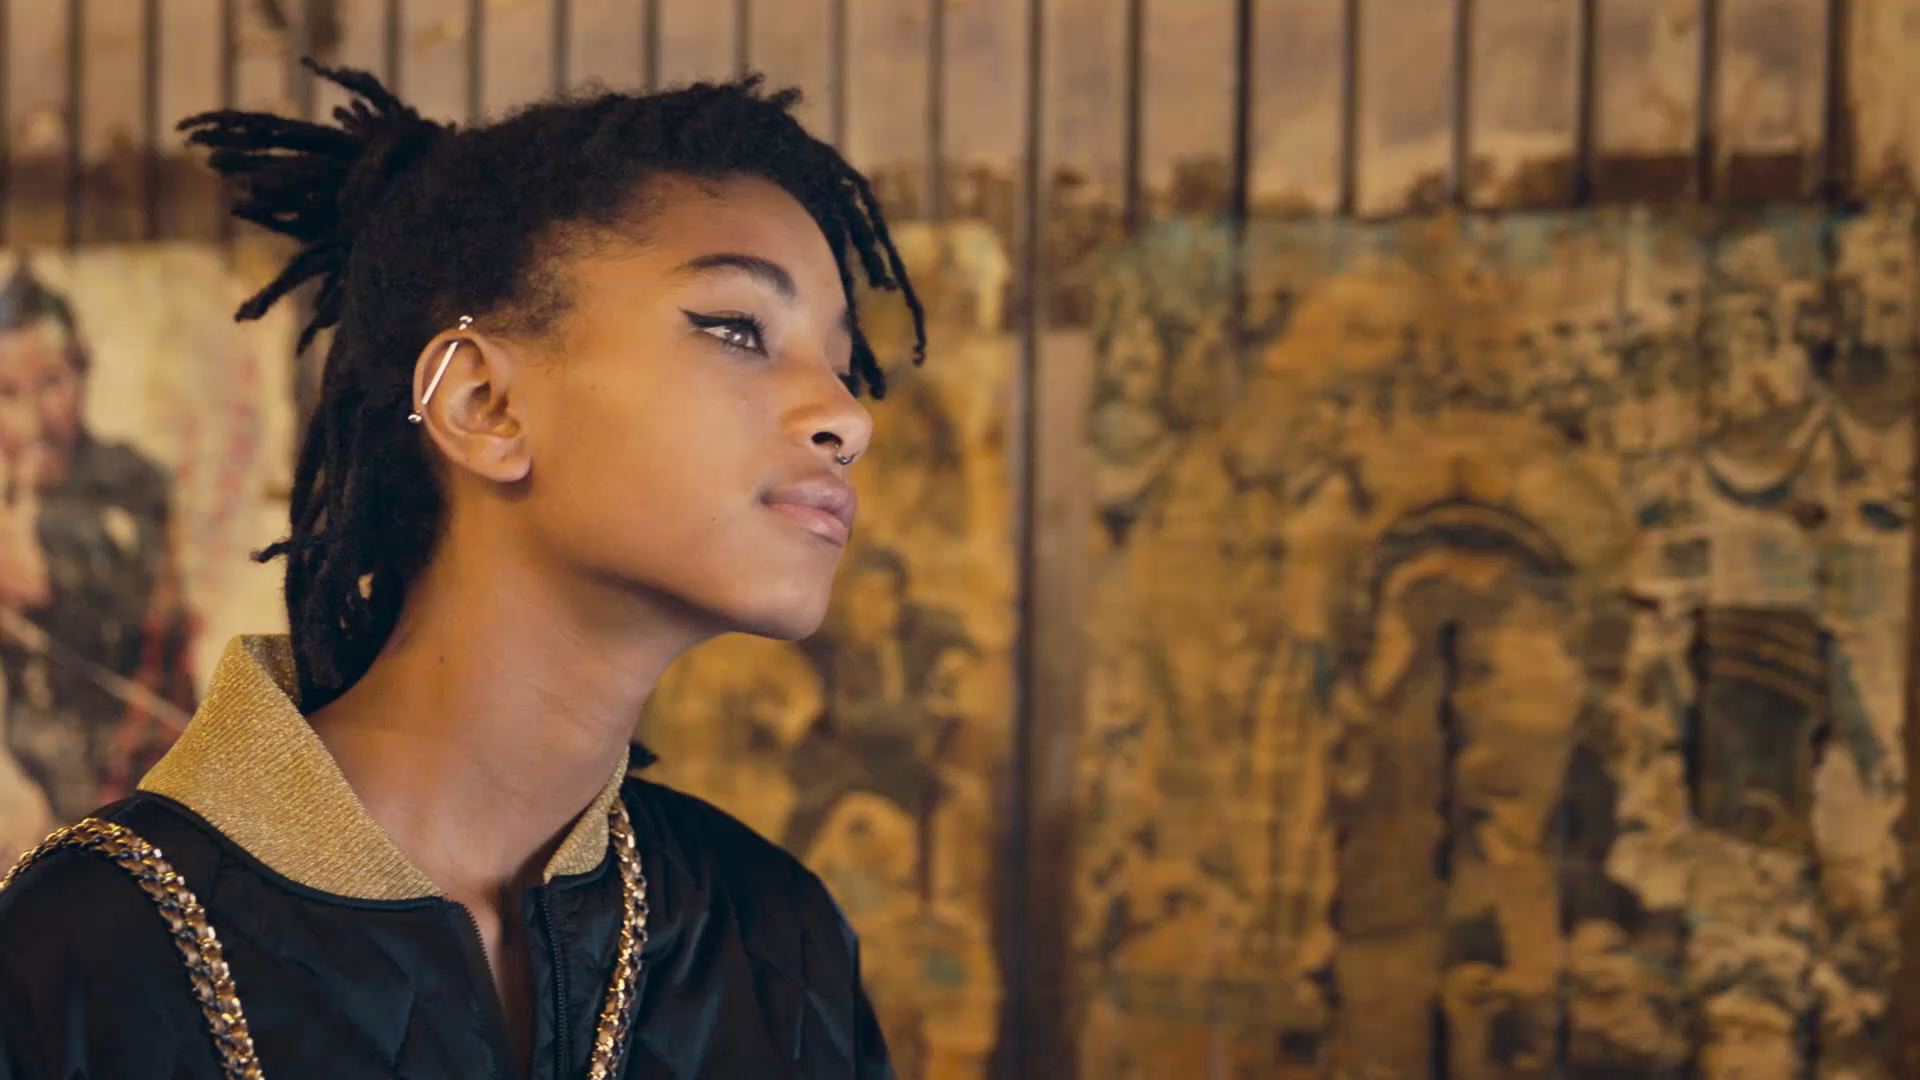 WILLOW SMITH GABRIELLE CHANEL